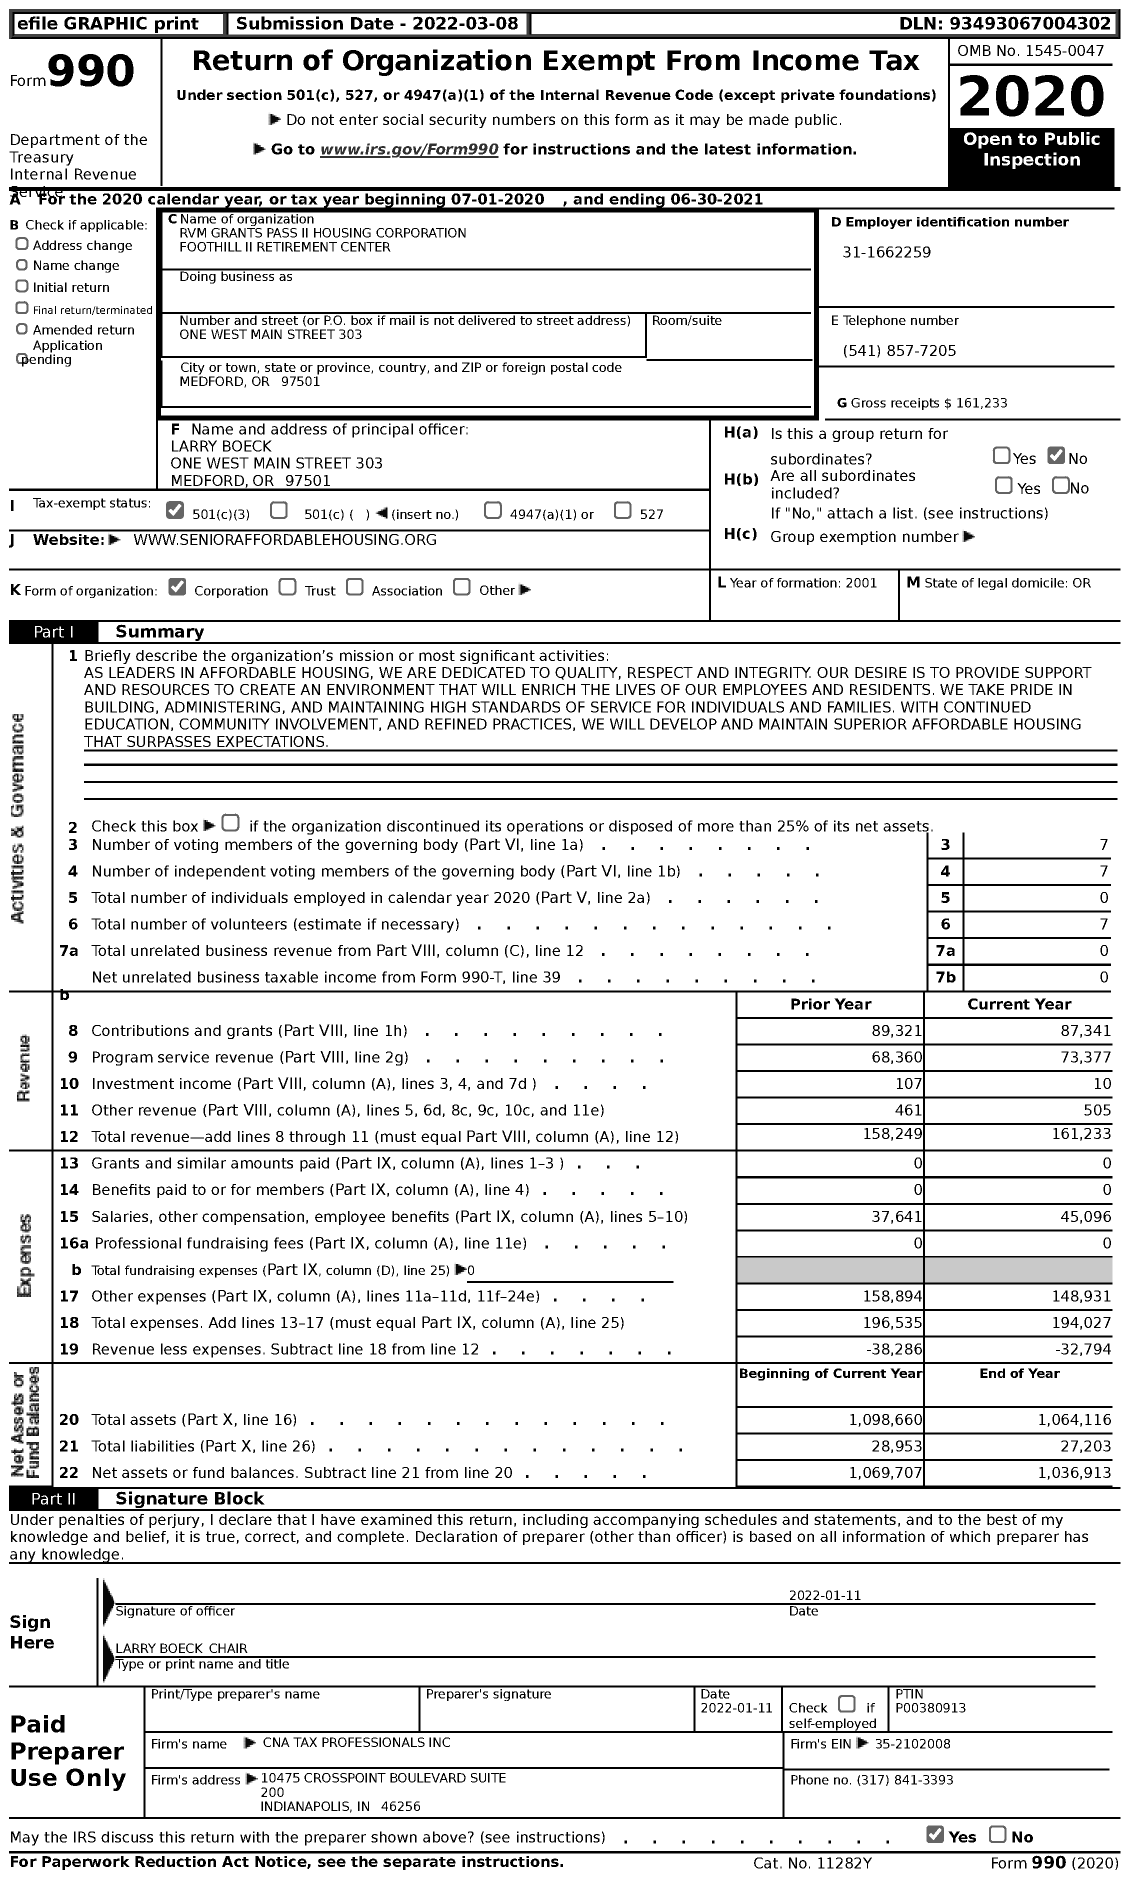 Image of first page of 2020 Form 990 for RVM Grants Pass II Housing Corporation Foothill II Retirement Center